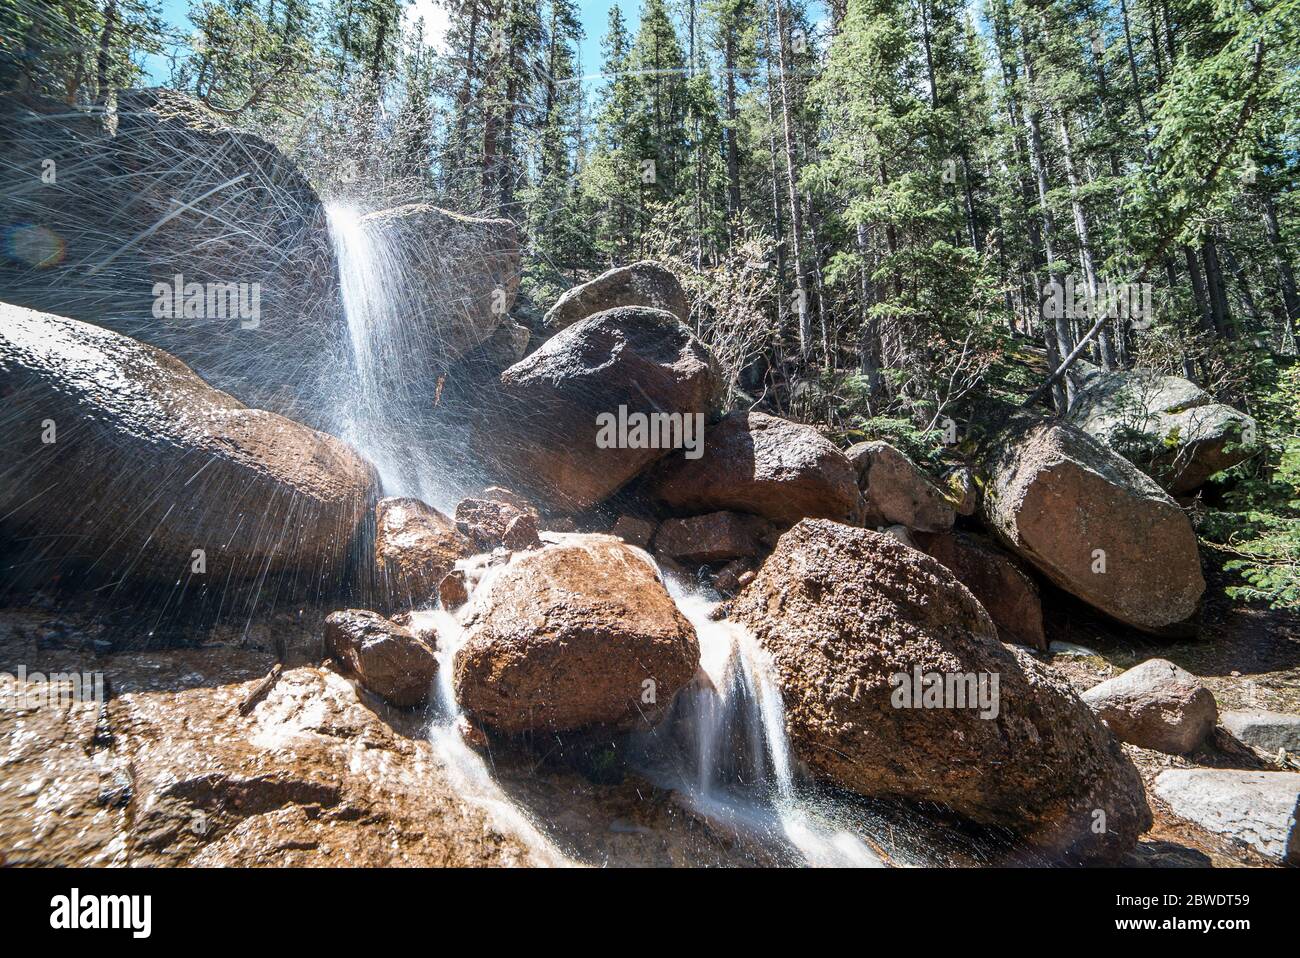 Cascate di Horsethief a Horsethief Falls Trail, Pike National Forest, divide, Colorado, Long Exposure Waterfall foto Foto Stock